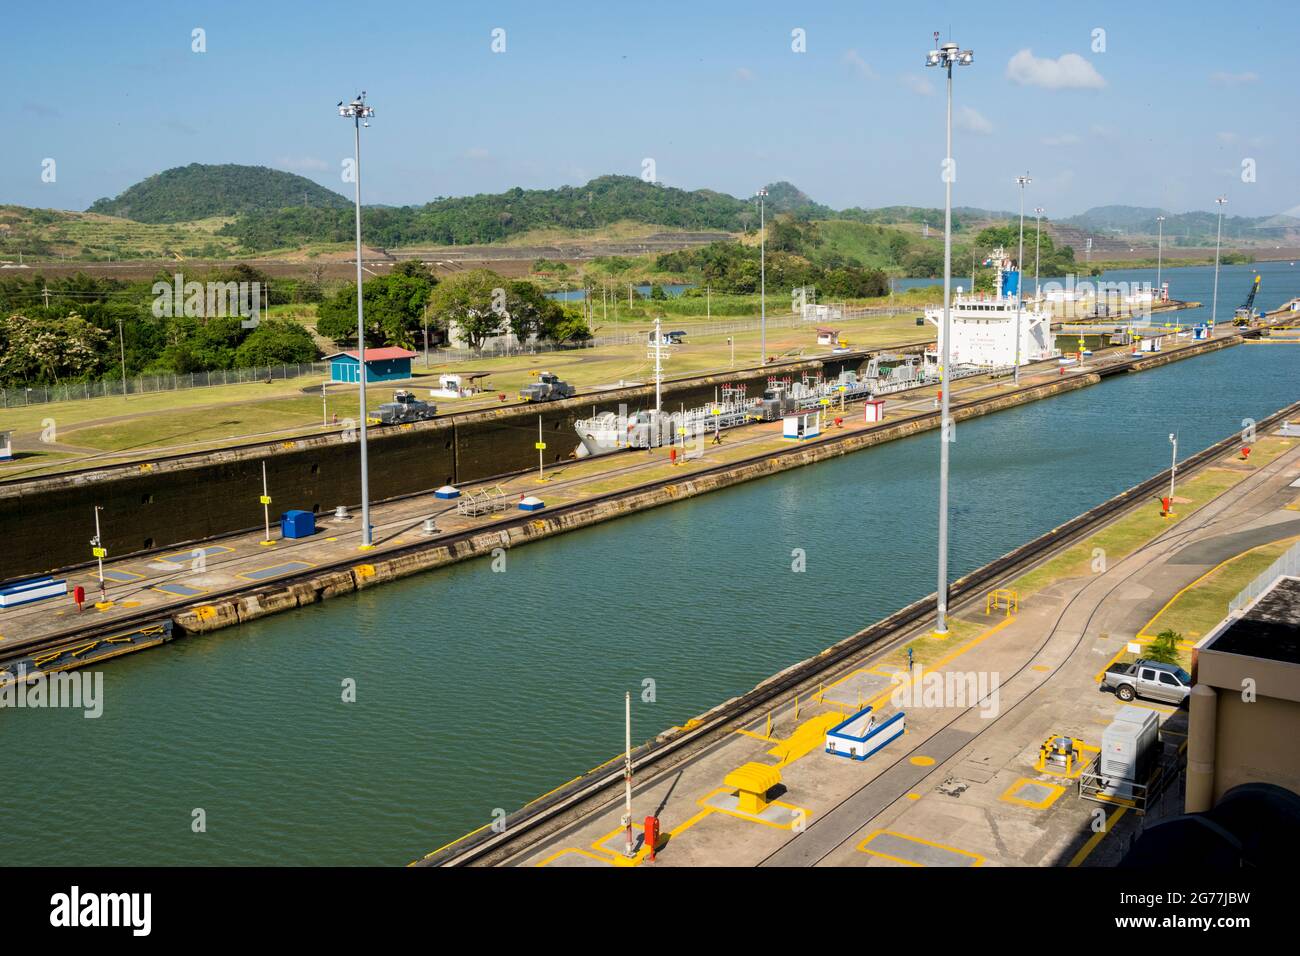 A large cargo just passed through Panama Canal in a sunny day. The main offices and one of the locks can be seen. Stock Photo